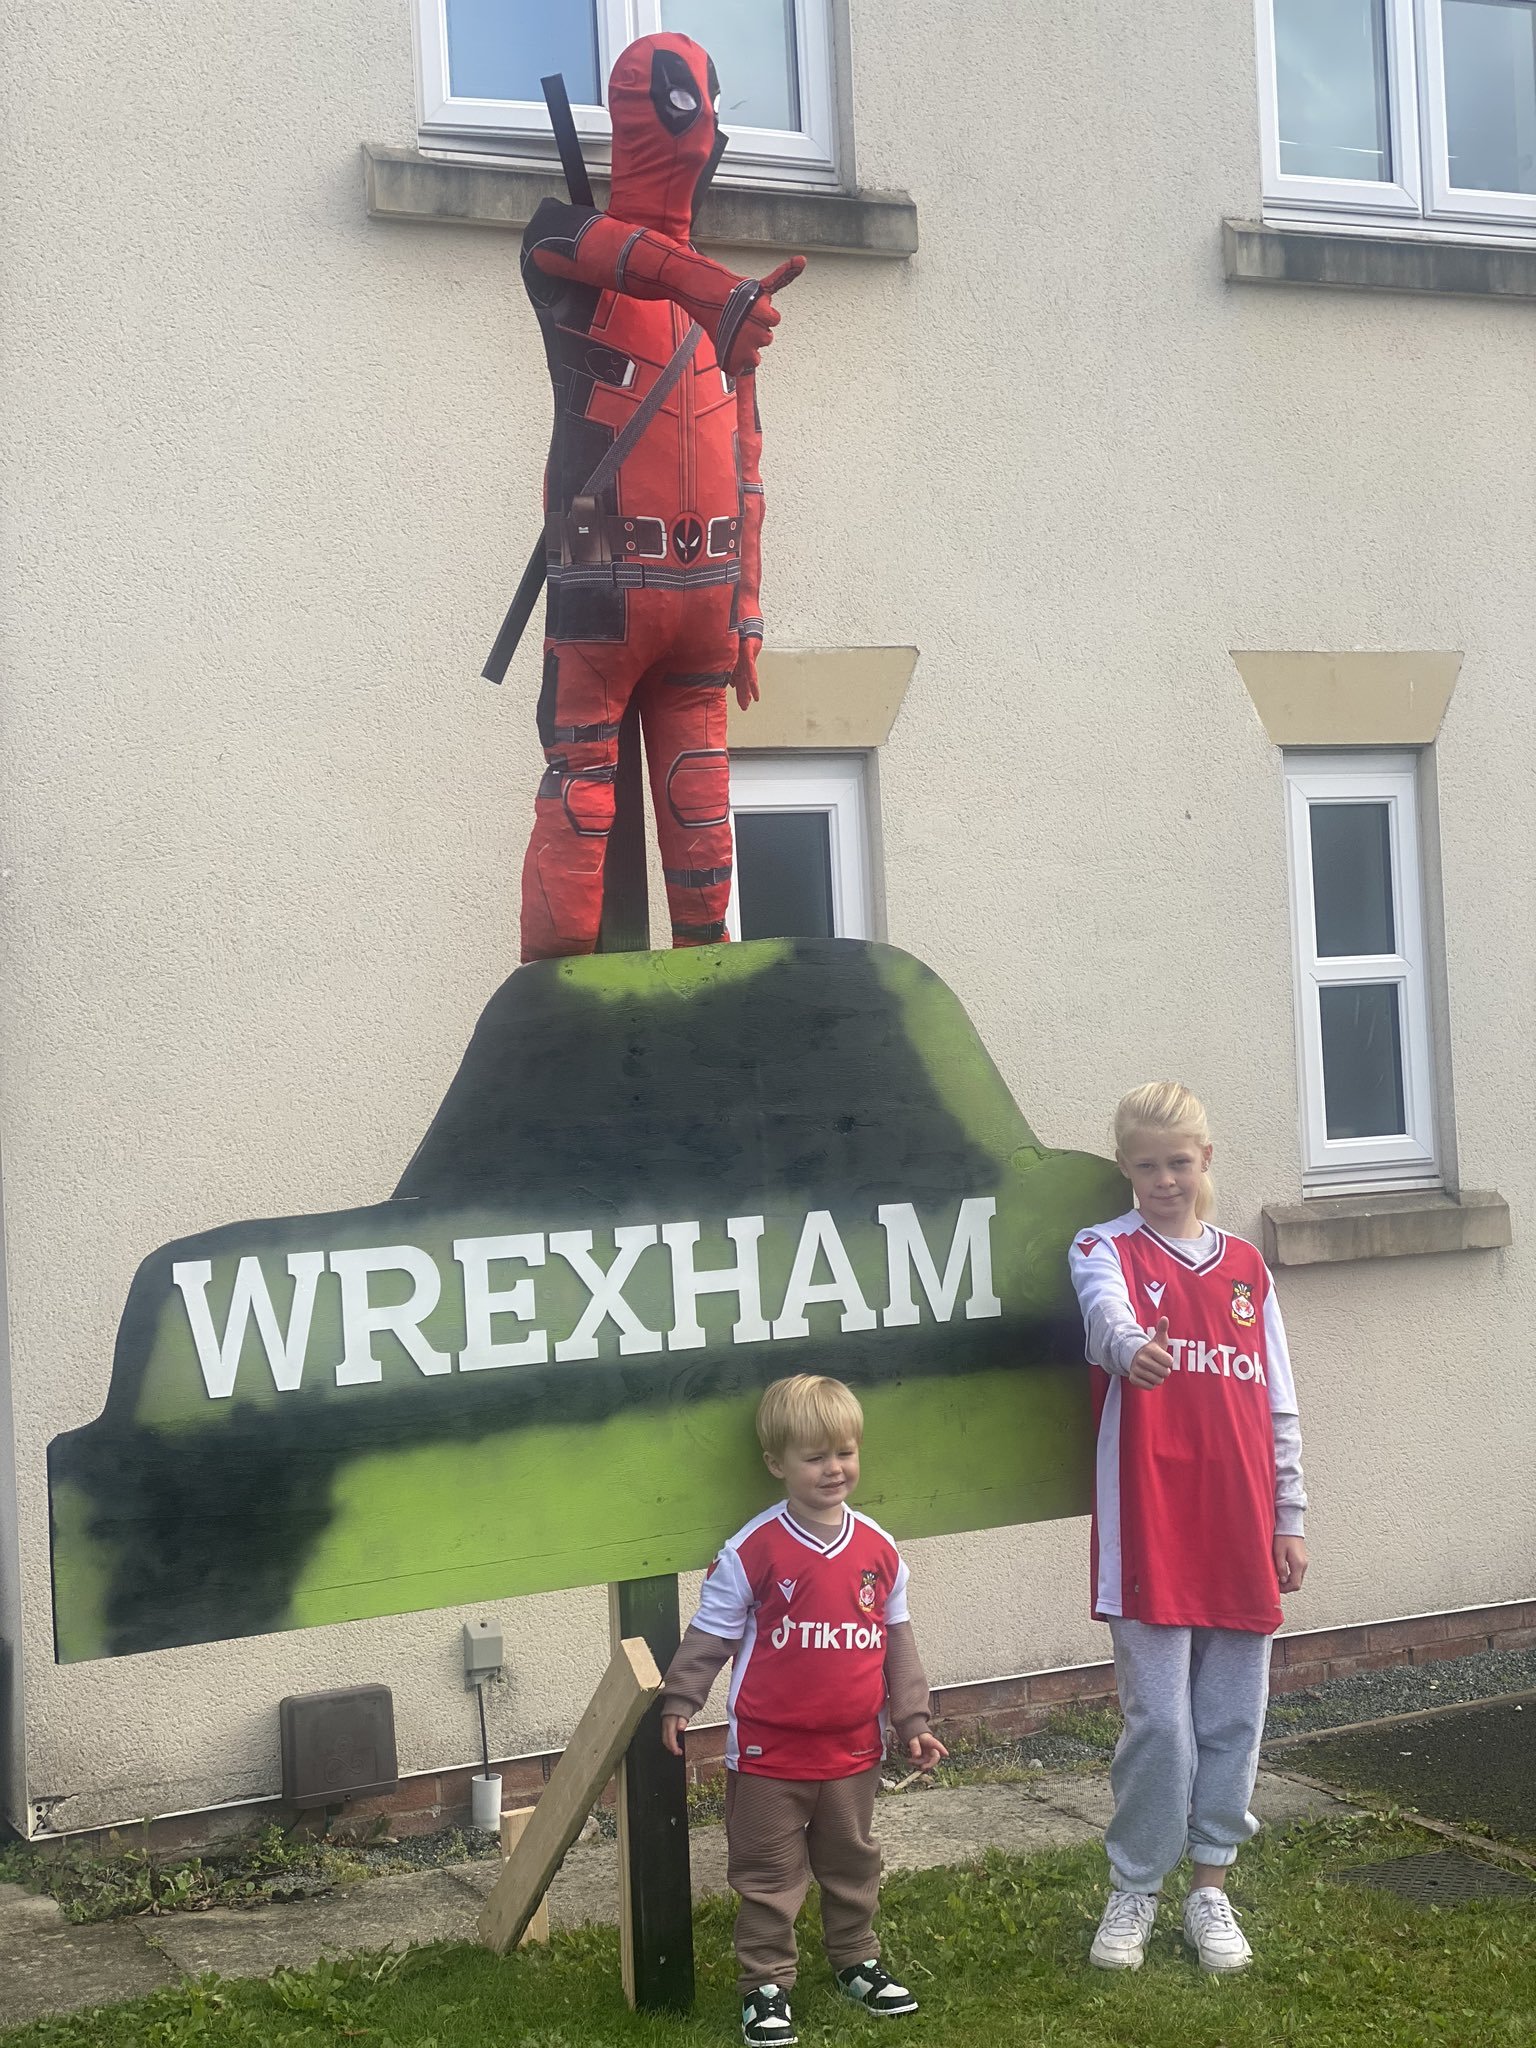 Ellie and Arthur, 11 and 13, posed for a photo with the straw Deadpool. Image: Leanne Gibbons/Twitter